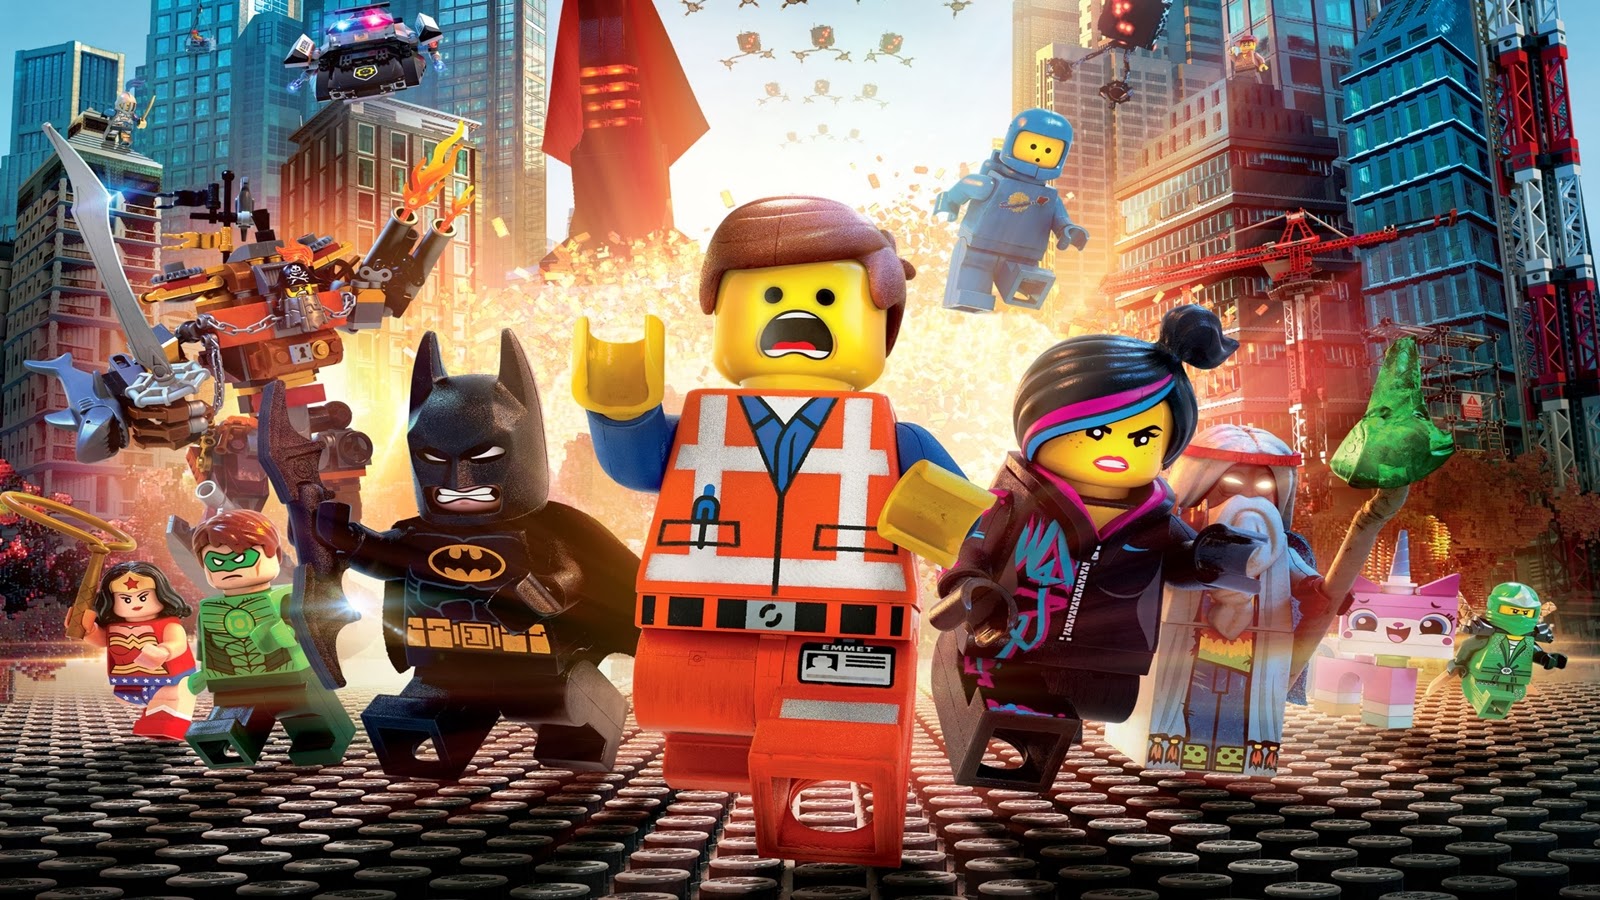 The Lego Movie Best HD Wallpaper Charming Collection Of Photos